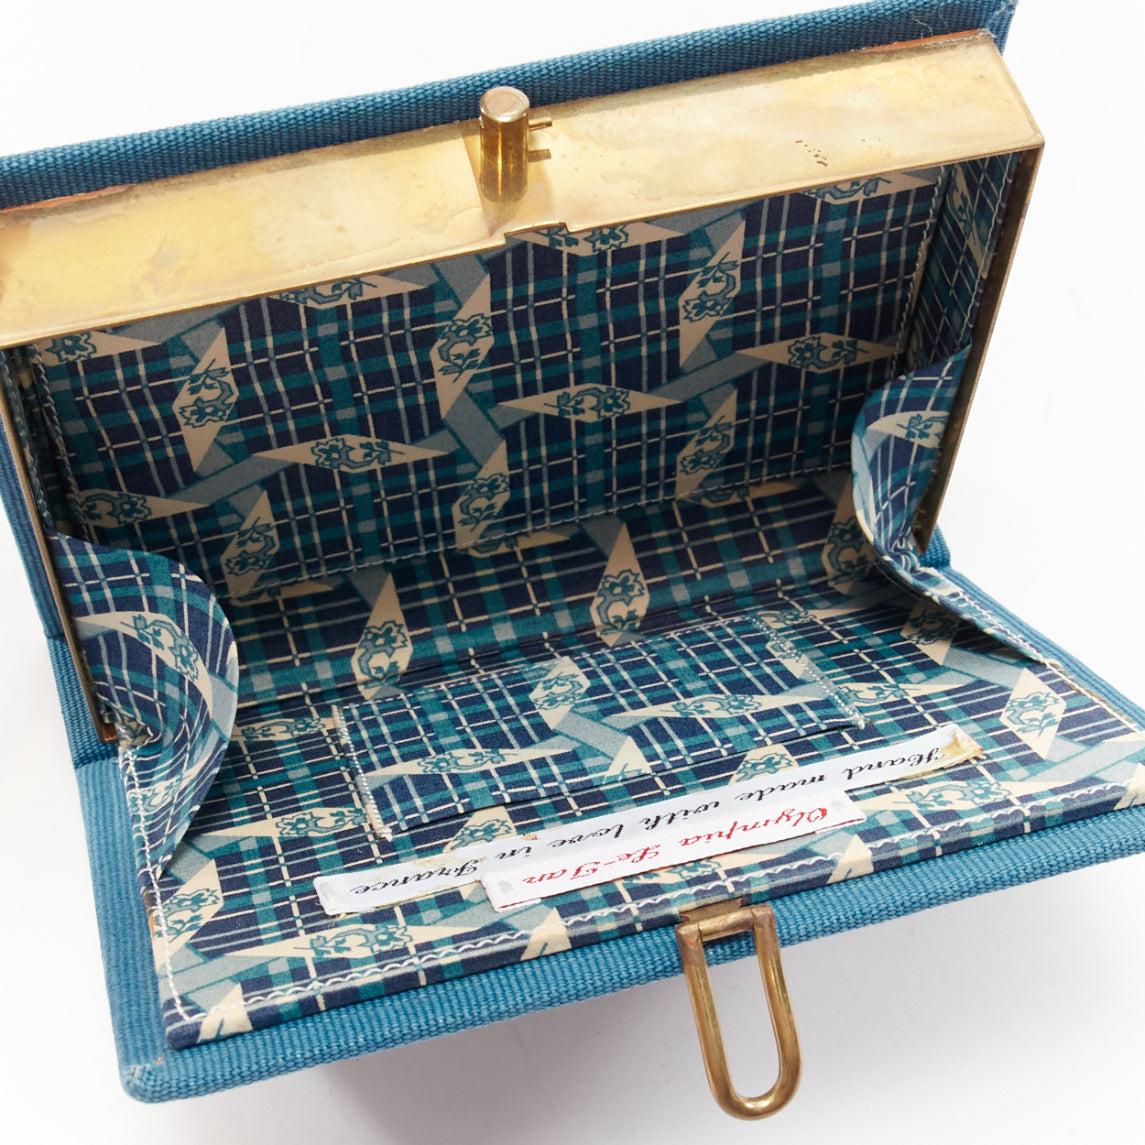 OLYMPIA LE TAN Why Worry blue fabric embroidery gold mini book box clutch bag 5